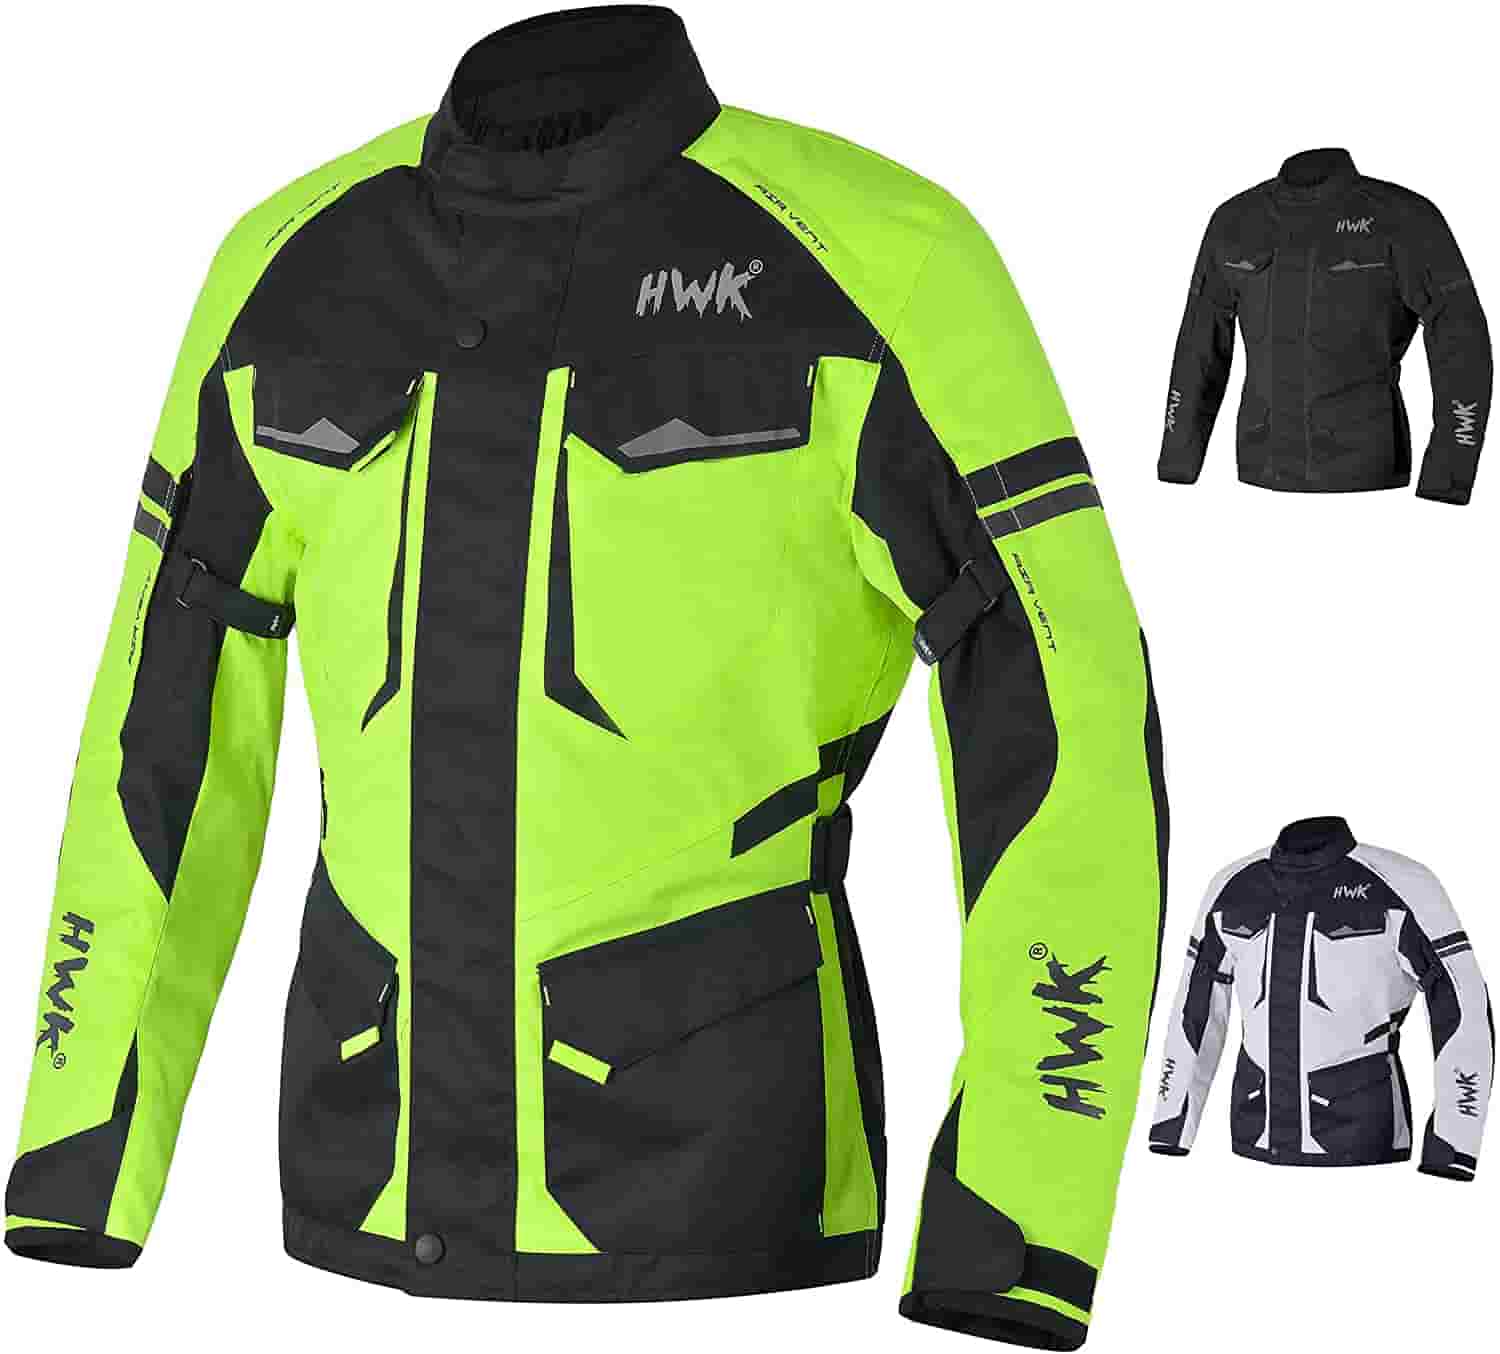 Startling Collections Of hwk motorcycle jackets Photos - style motorcycle